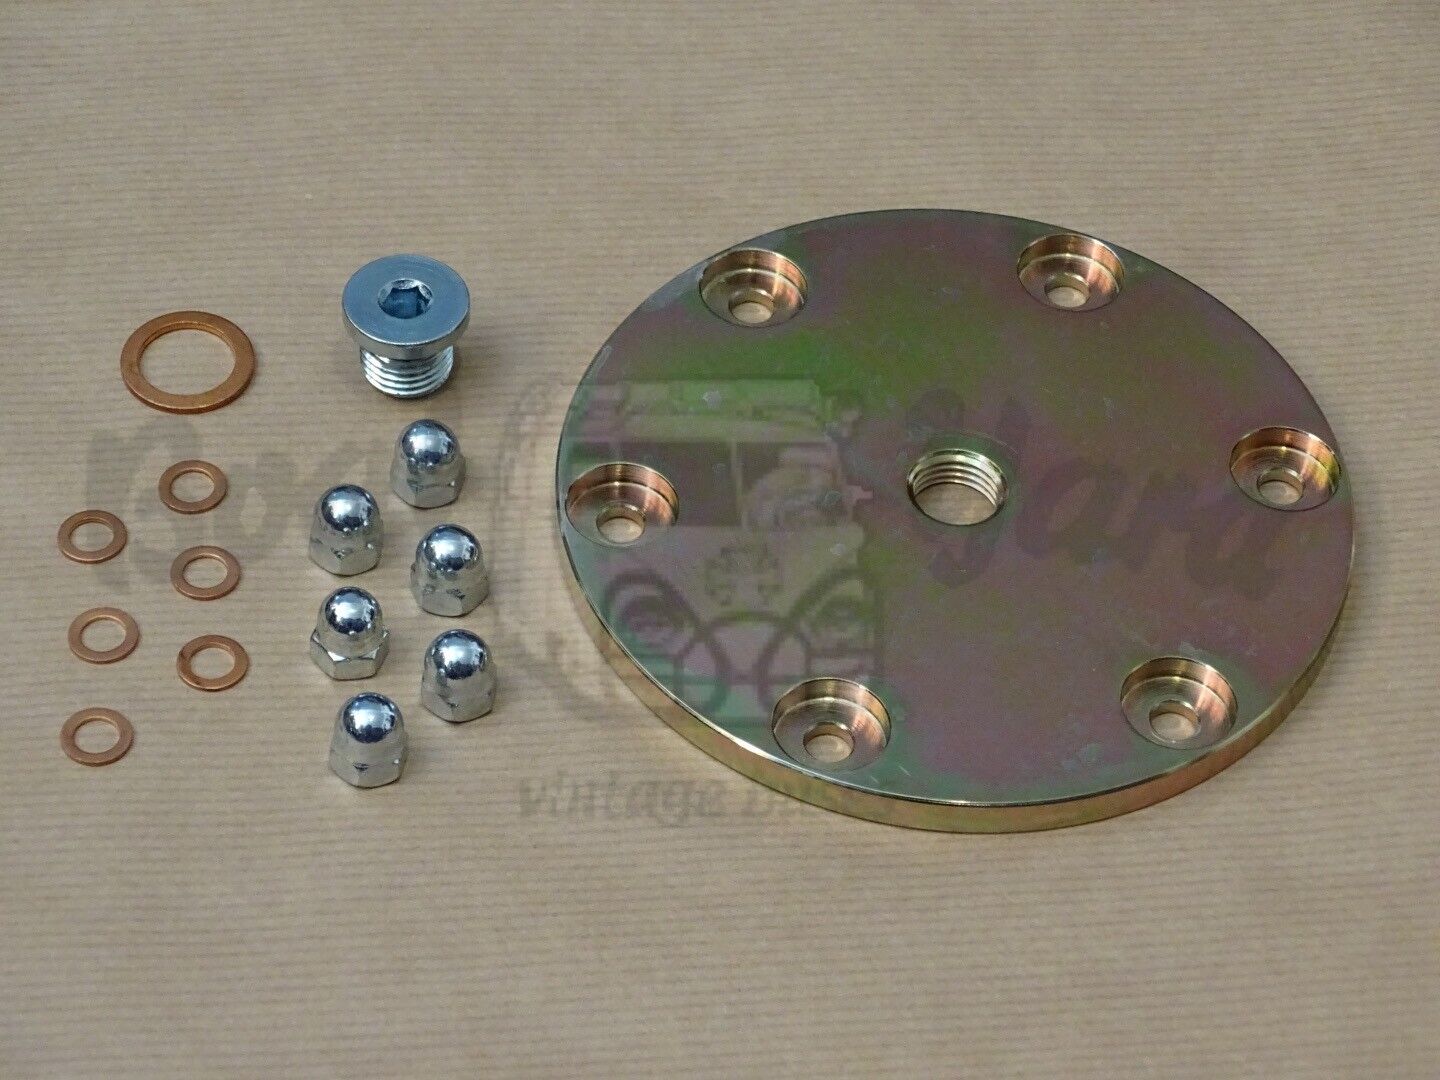 Oil sump cover plate